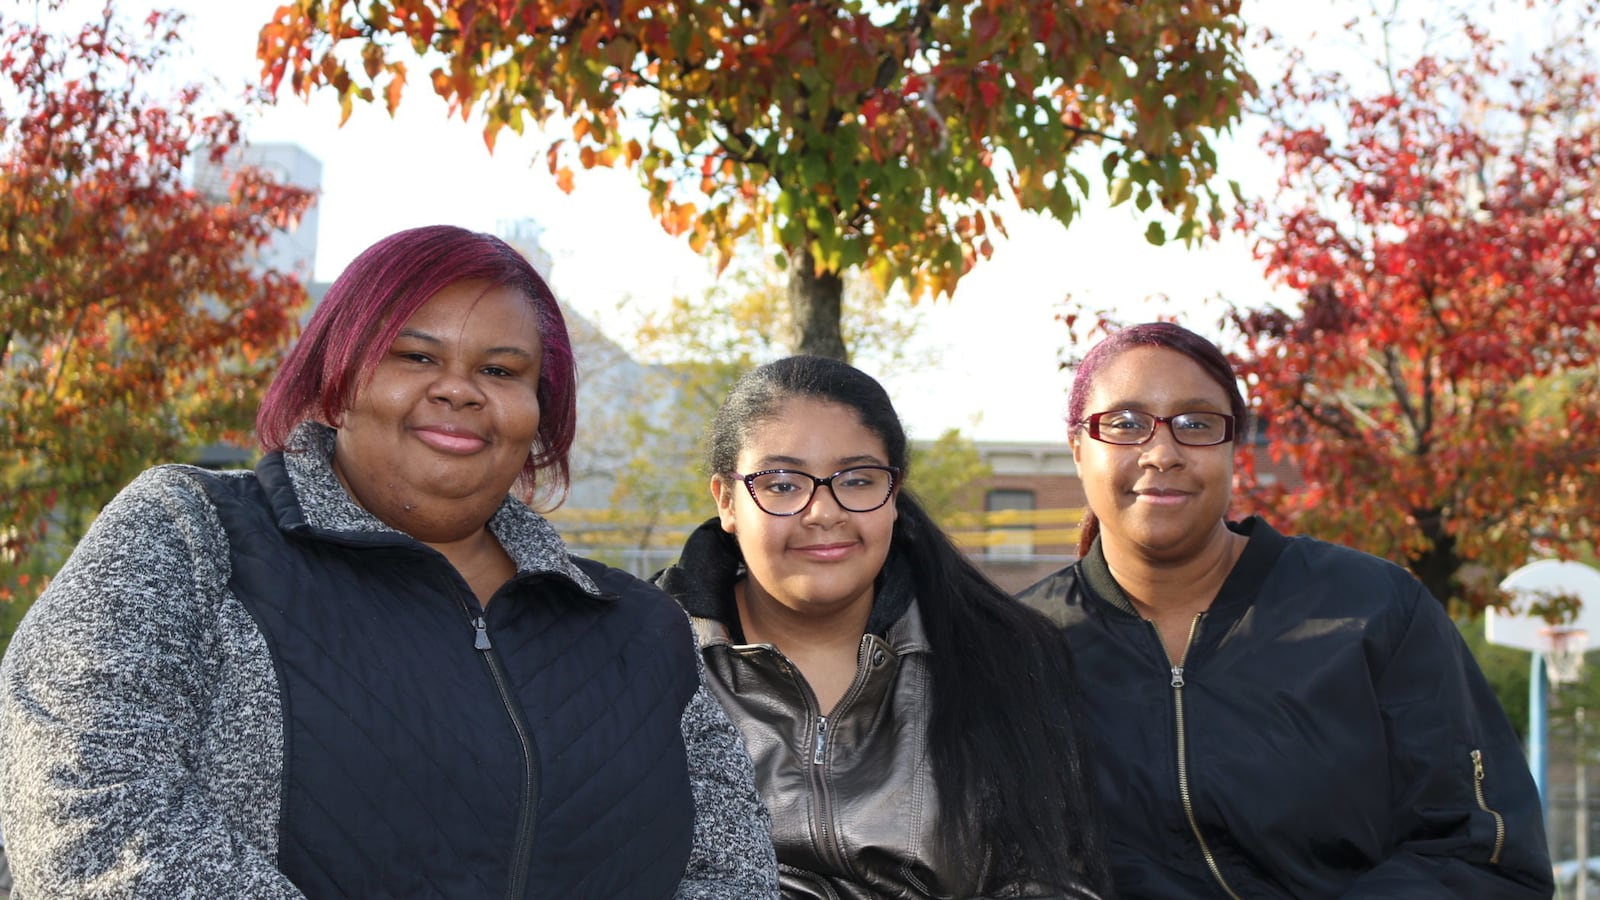 Melina Mays (center) is attending Sunset Park Prep, which was her first choice. Her mom, Dorothy Mays (left) and aunt, Cindy Mays (right) hadn't heard of the school prior to touring it.